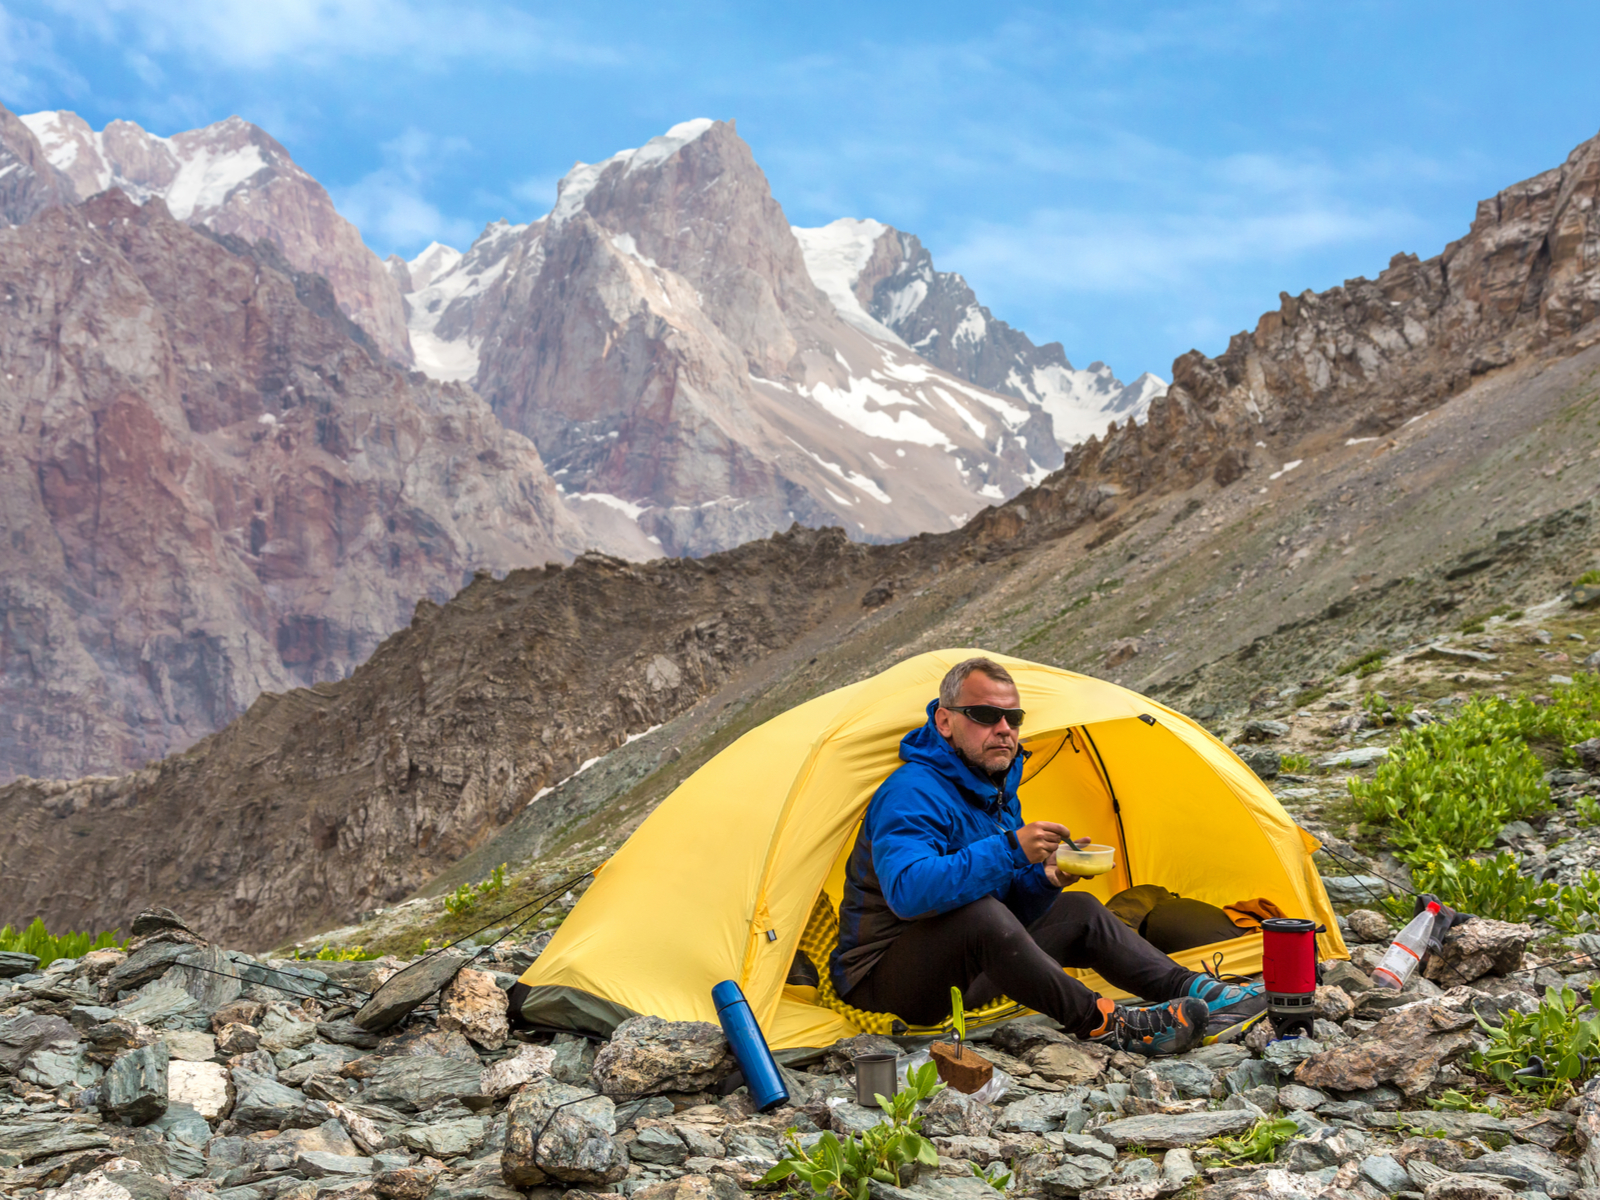 Cool older man with grey hair on the side of a mountain in the best one-man tent (yellow in color) drinking coffee